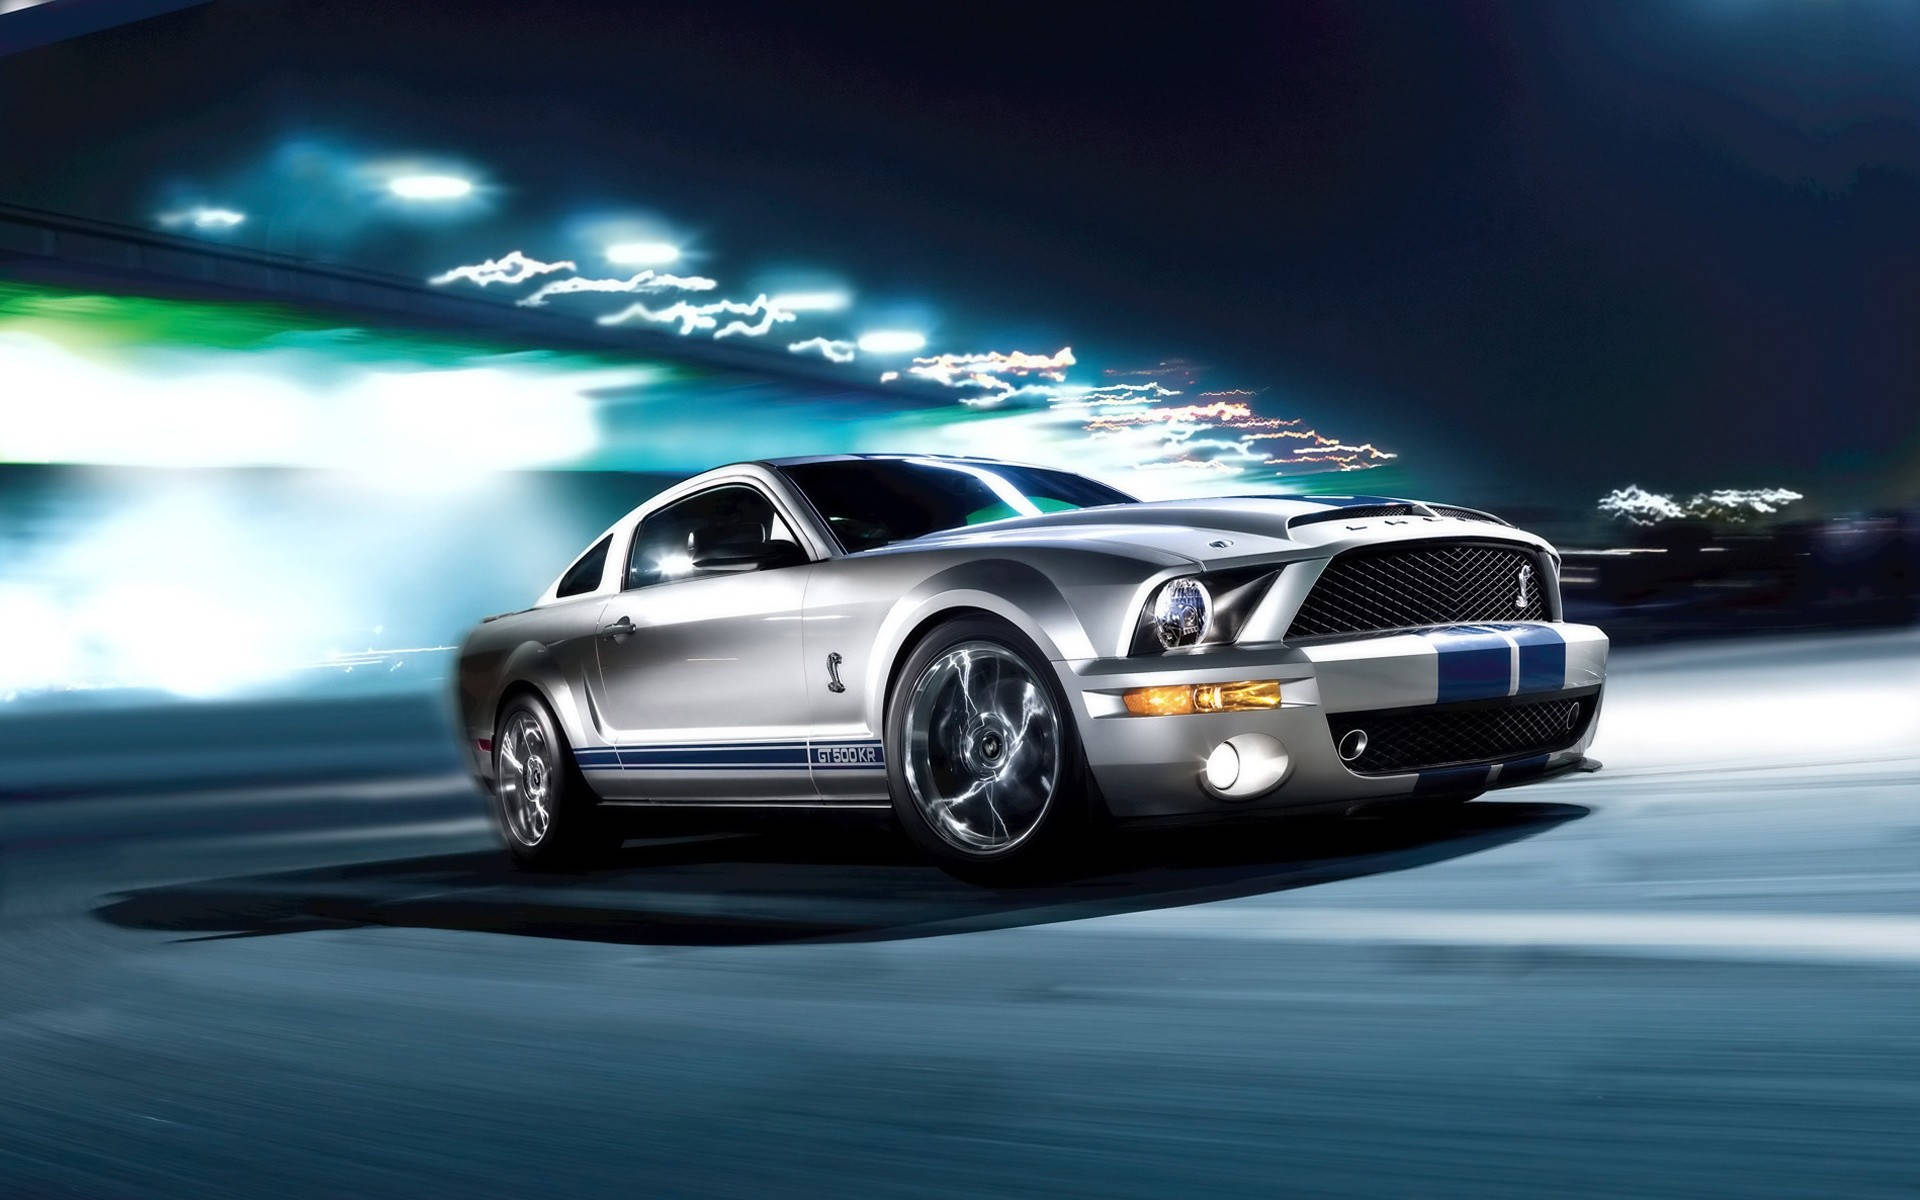 2009 Silver Shelby Mustang Hd